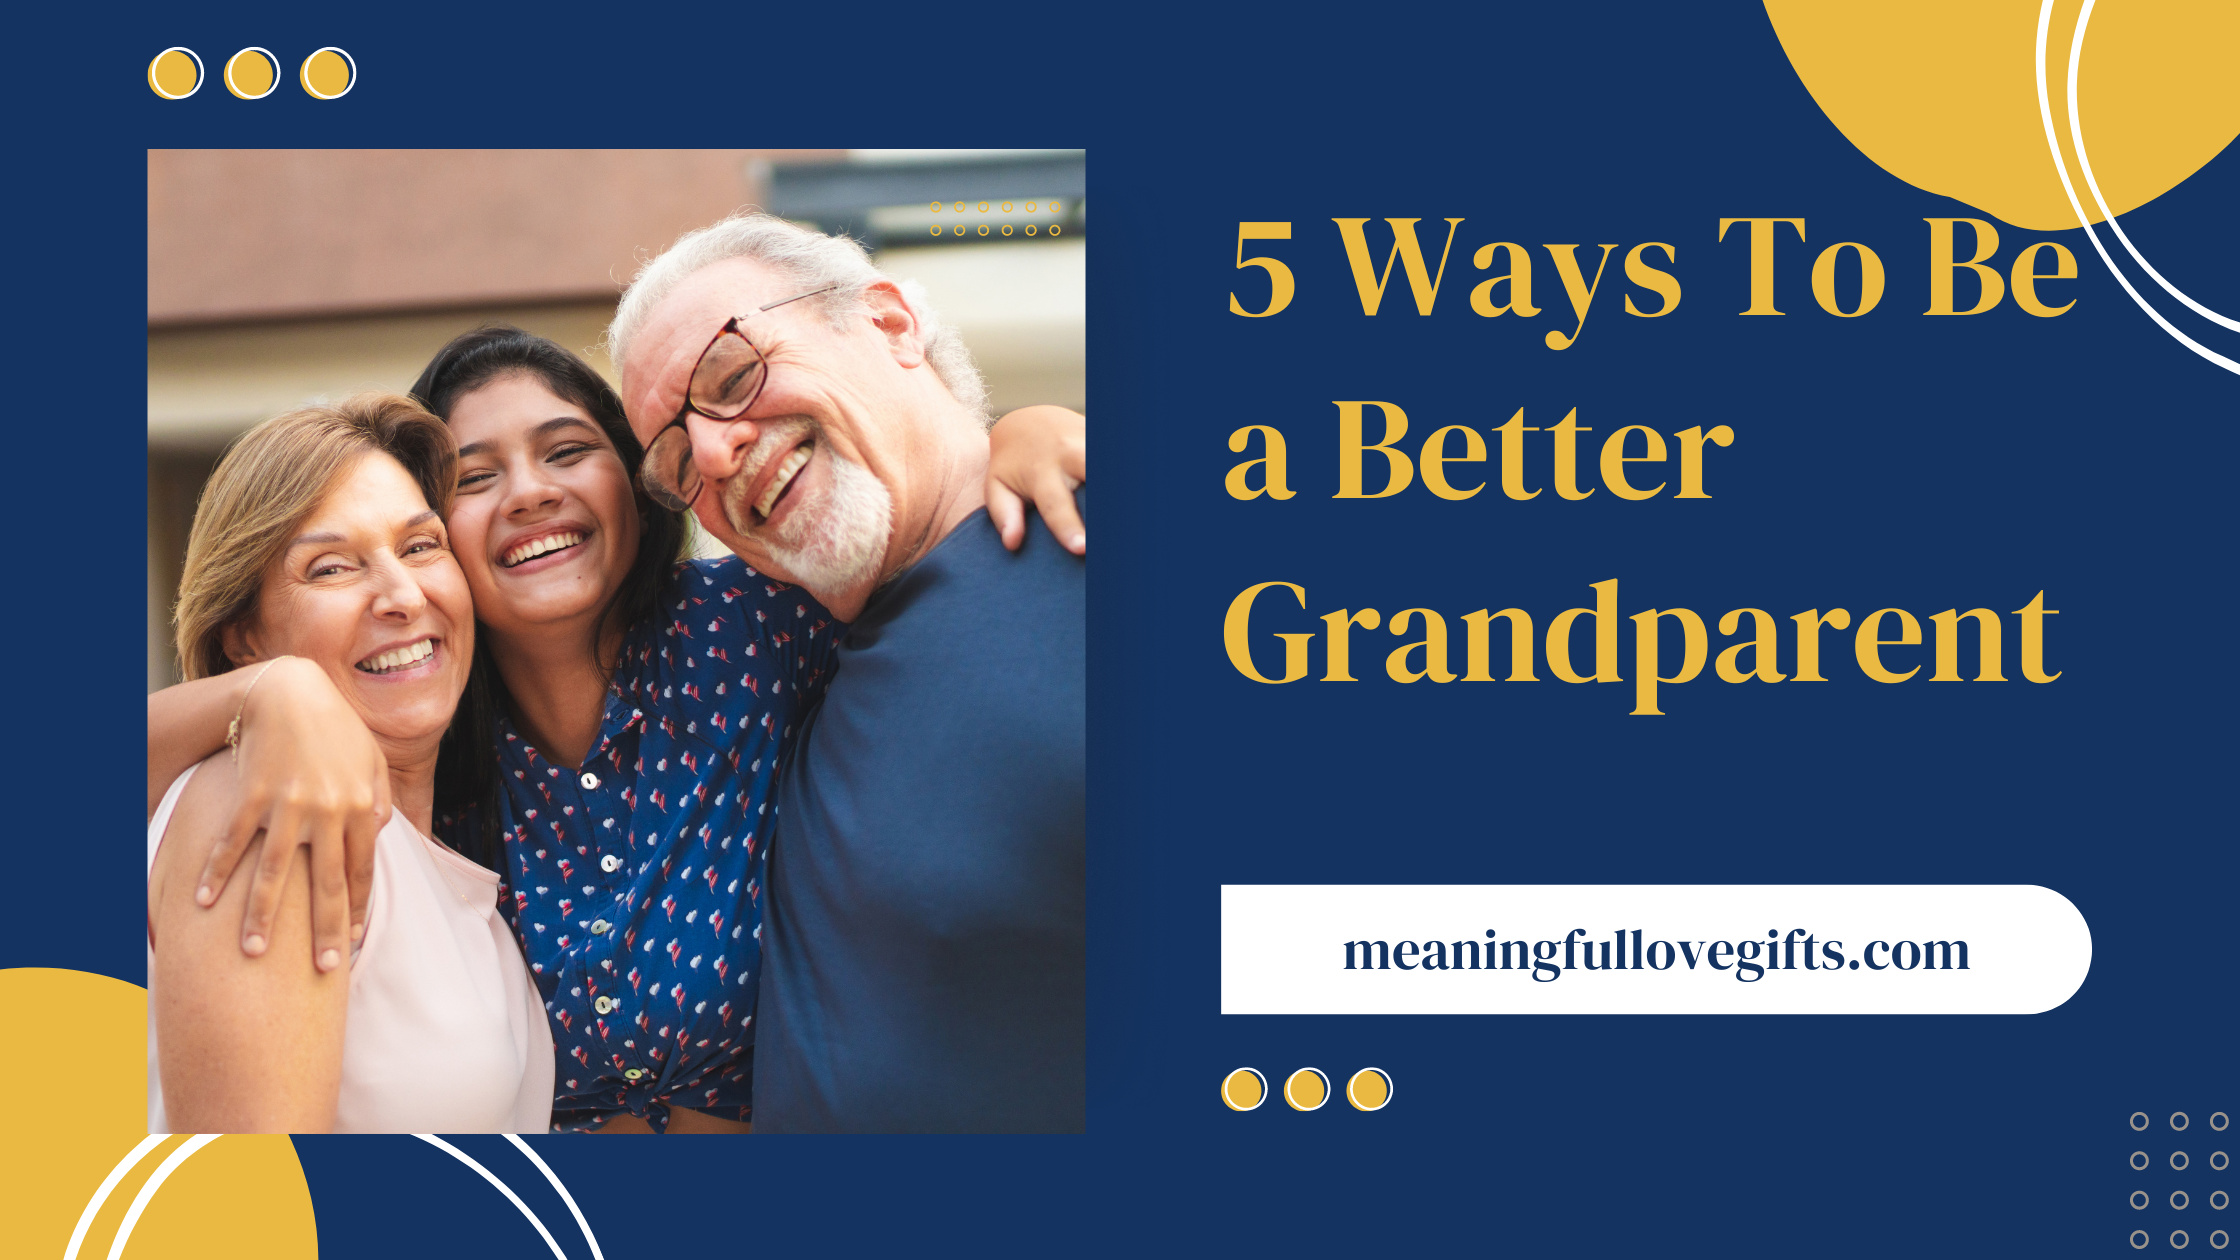 5 Ways to Be a Better Grandparent